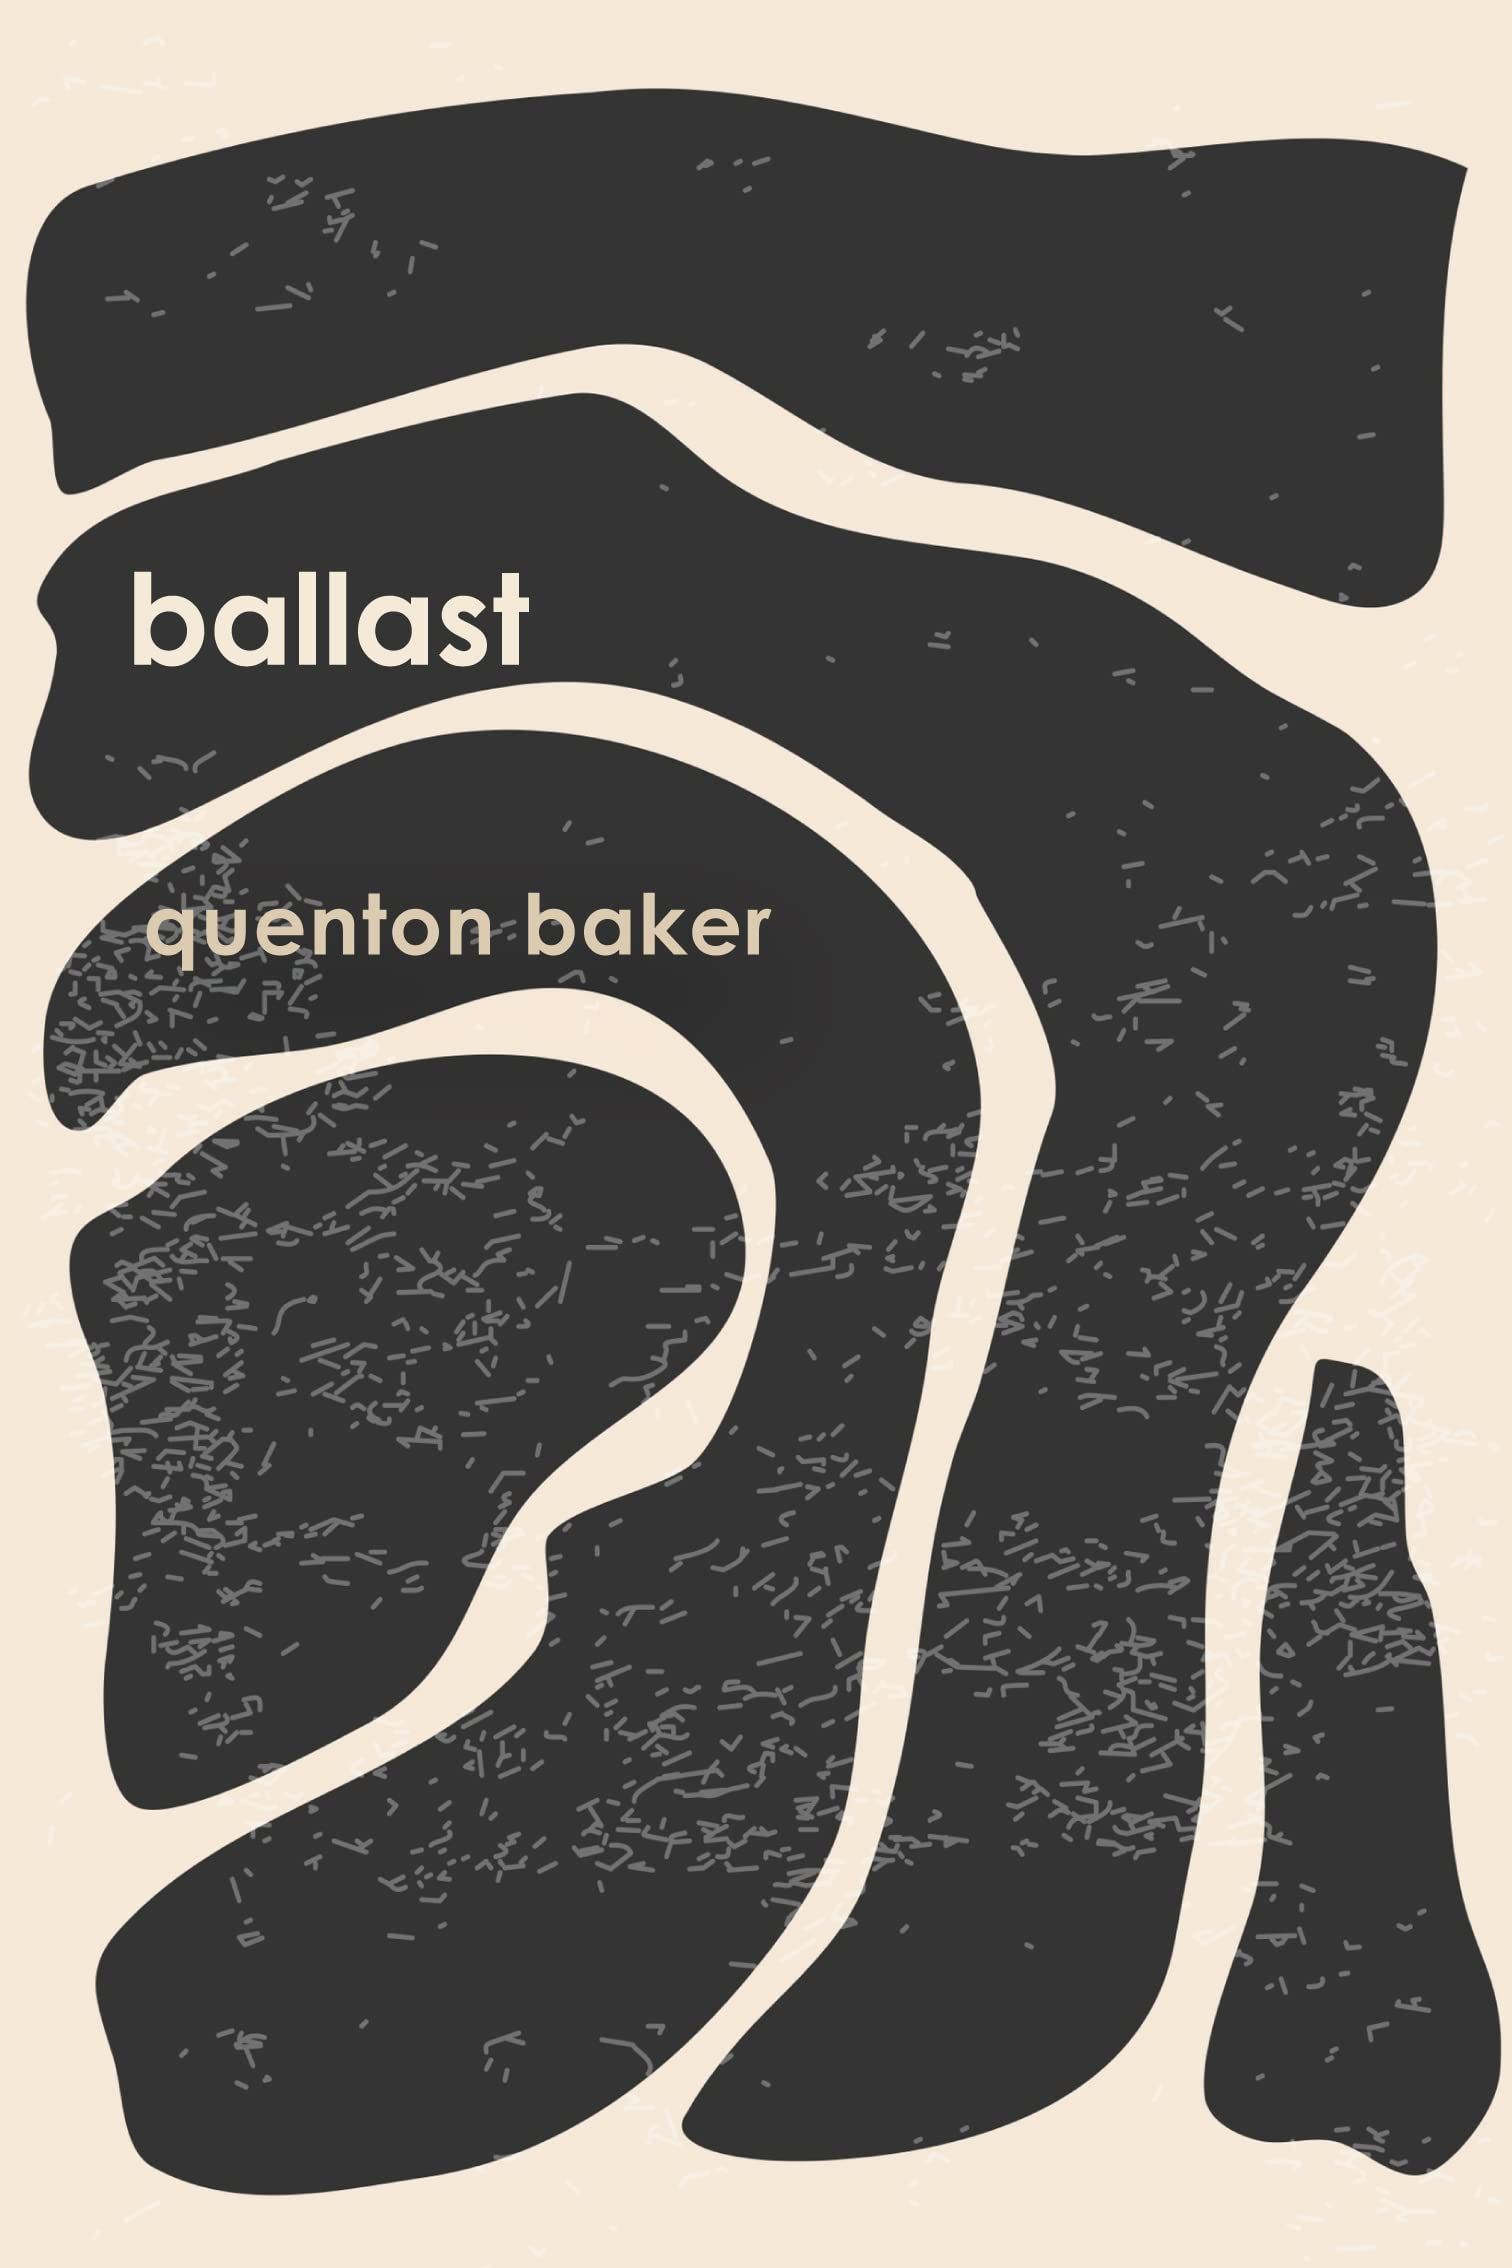 The Latitude to Want: On Quenton Baker’s “ballast”